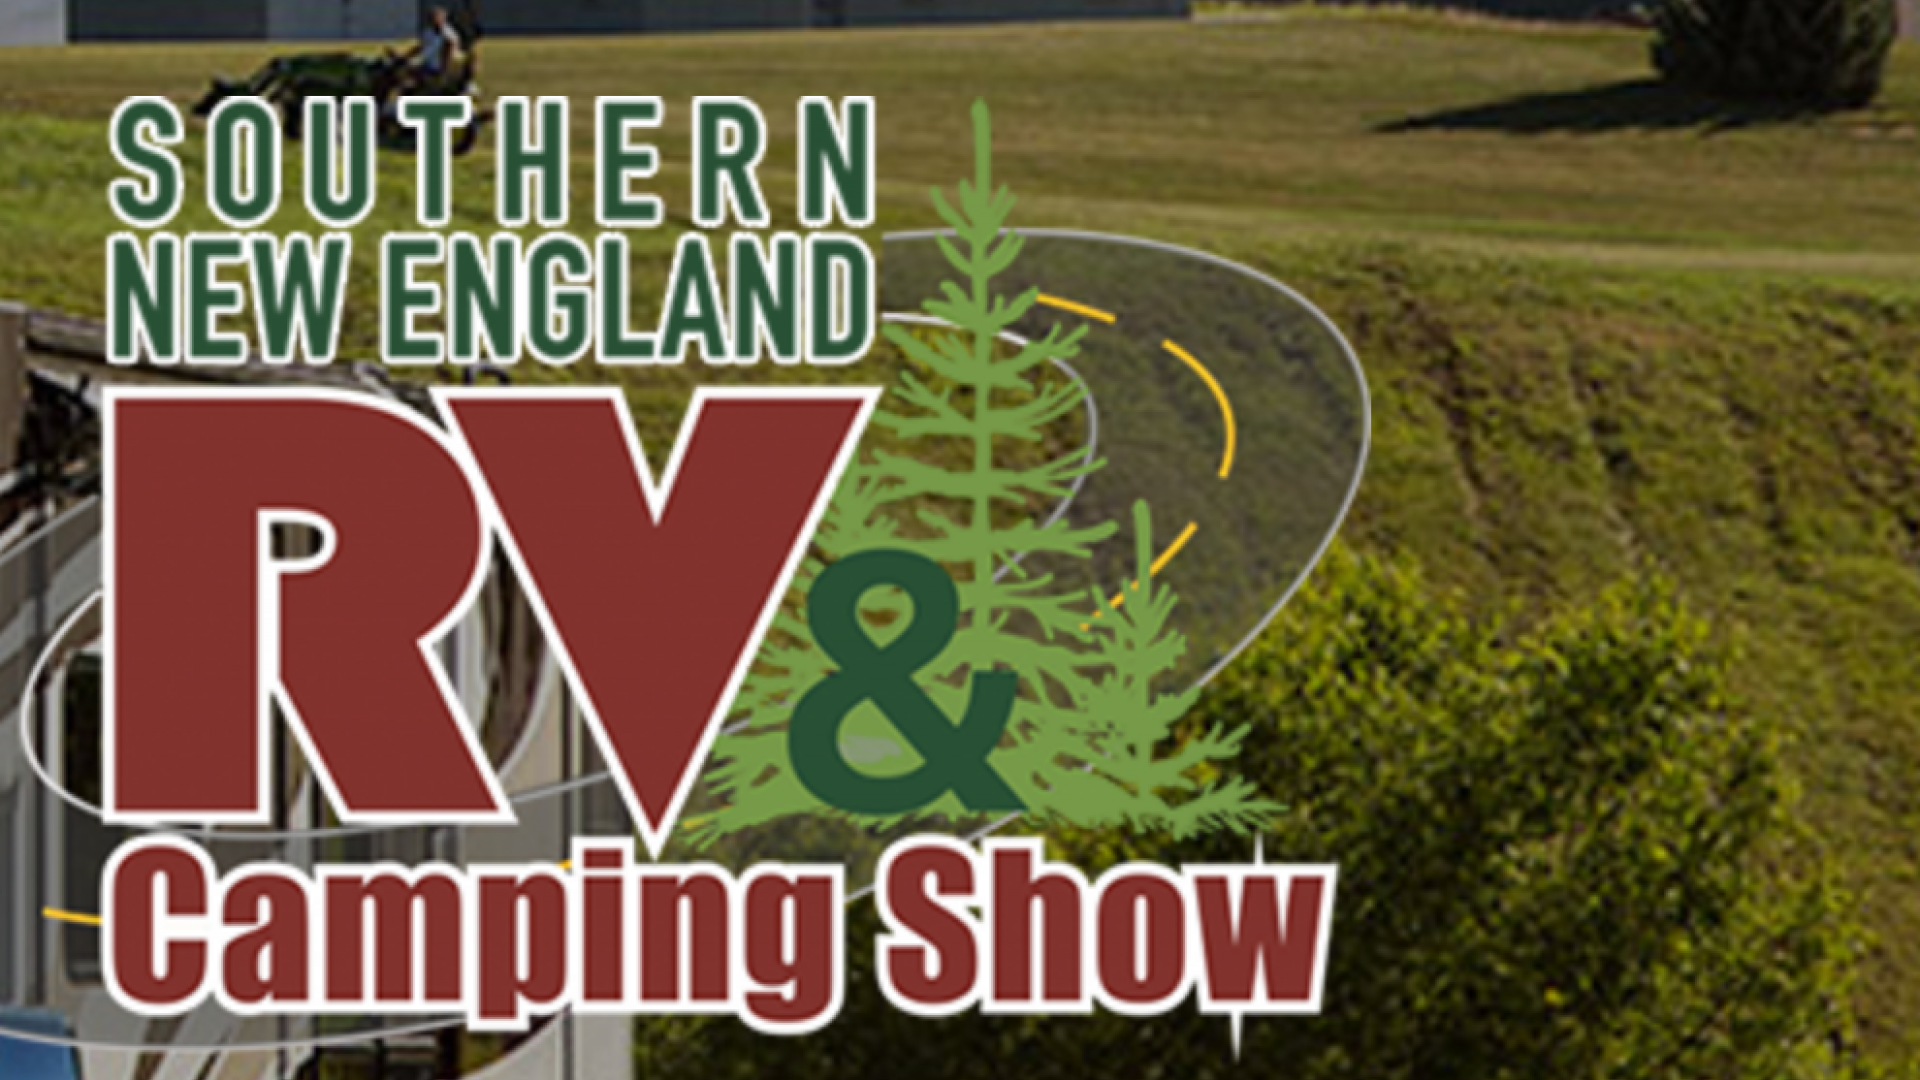 Southern New England RV Camping Show GDRV4Life Your Connection to